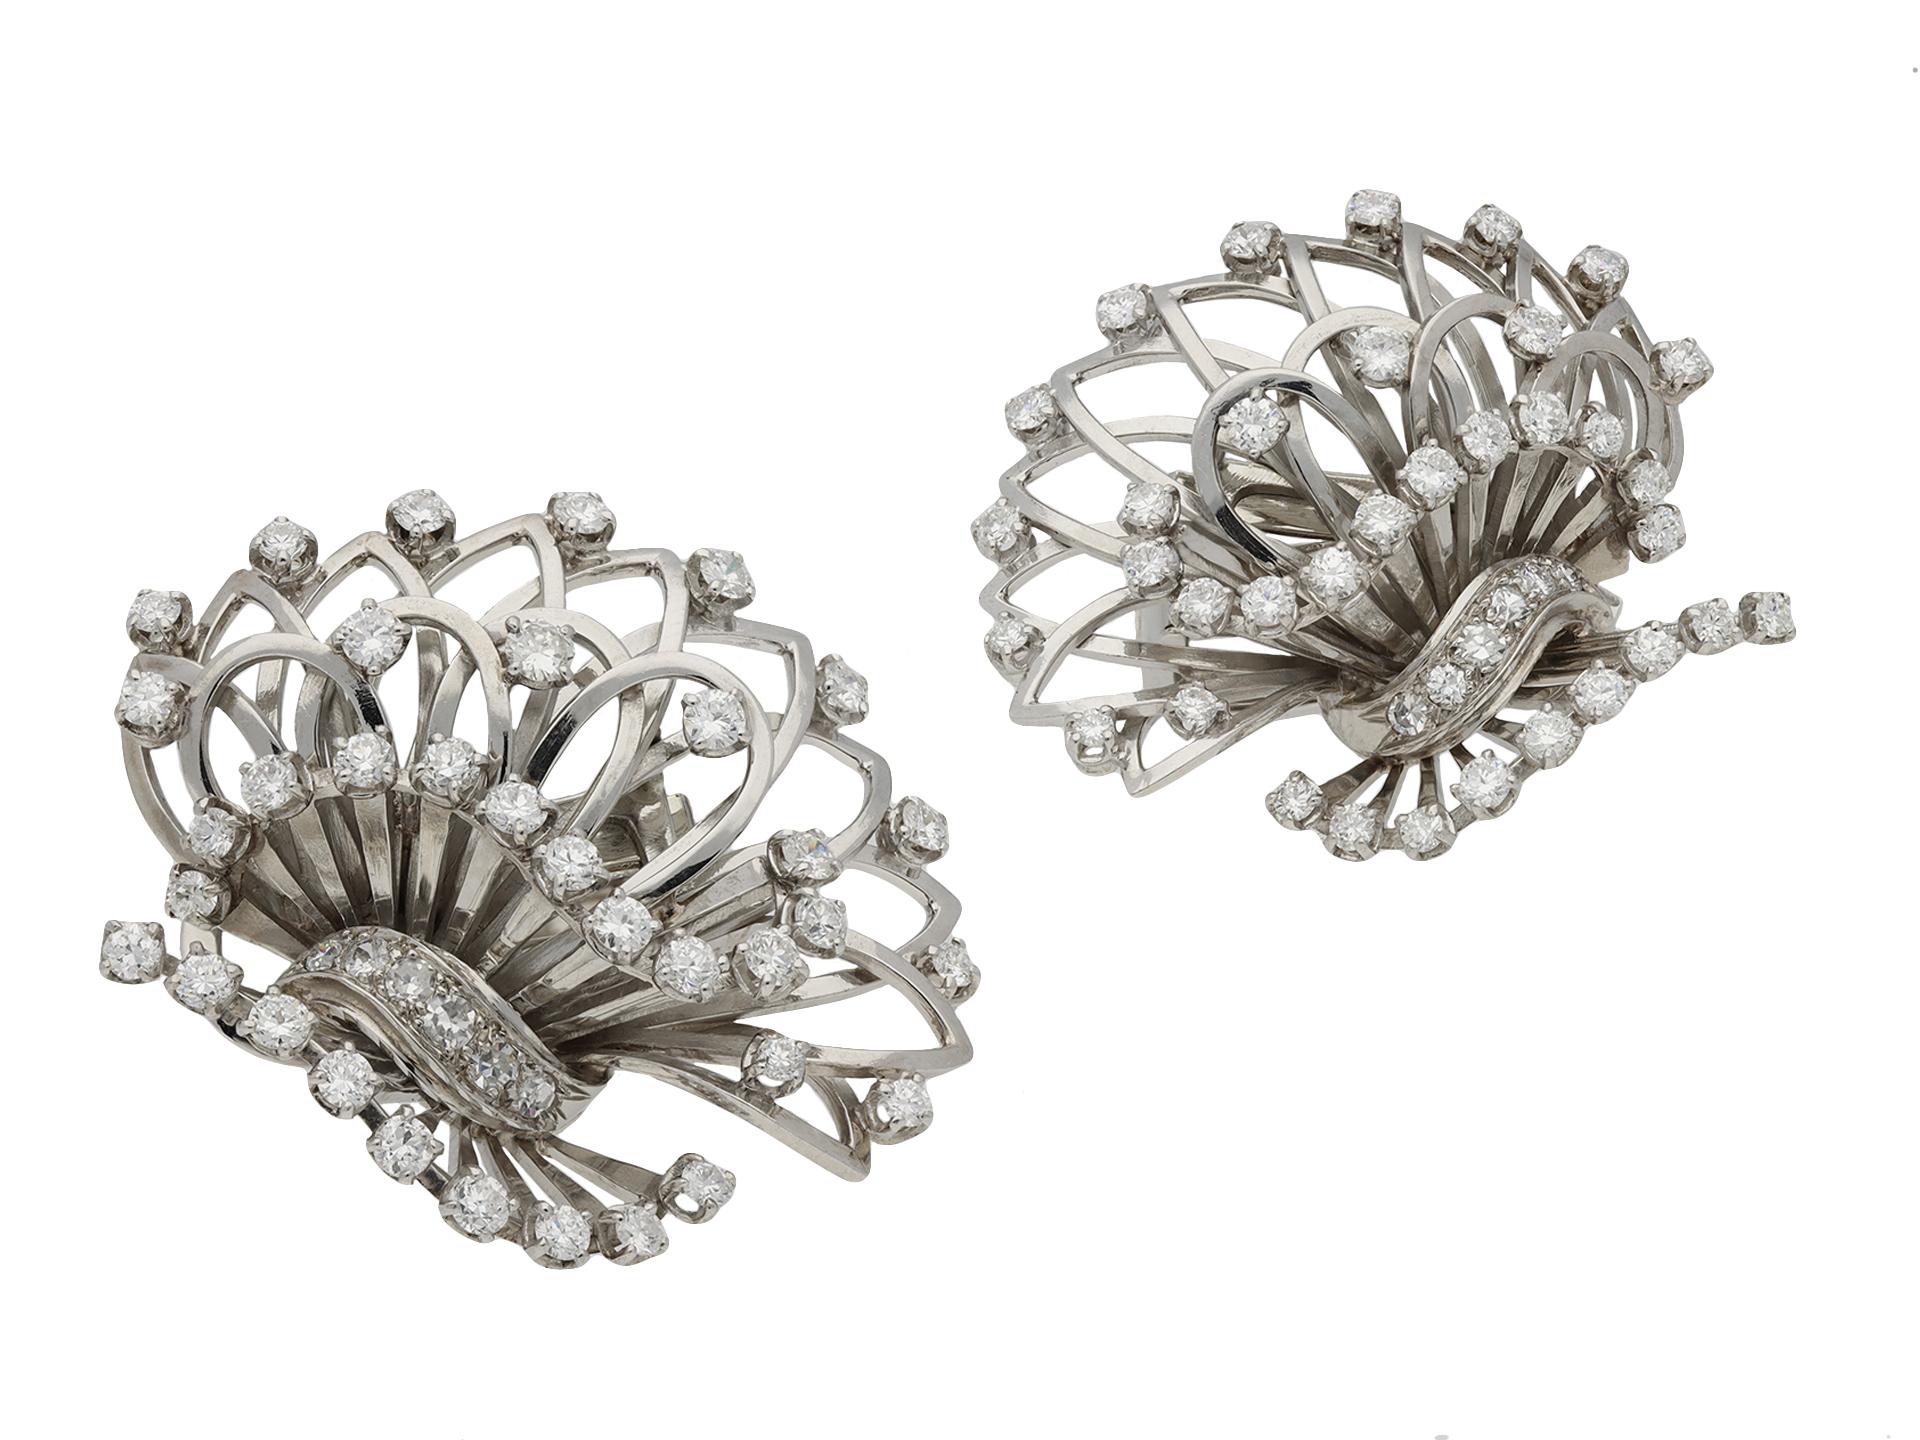 Boucheron diamond earrings. A matching pair, each set with thirty five round brilliant cut diamonds in open back claw settings, seventy in total, with a combined approximate weight of 2.10 carats, further set with six round eight cut diamonds in